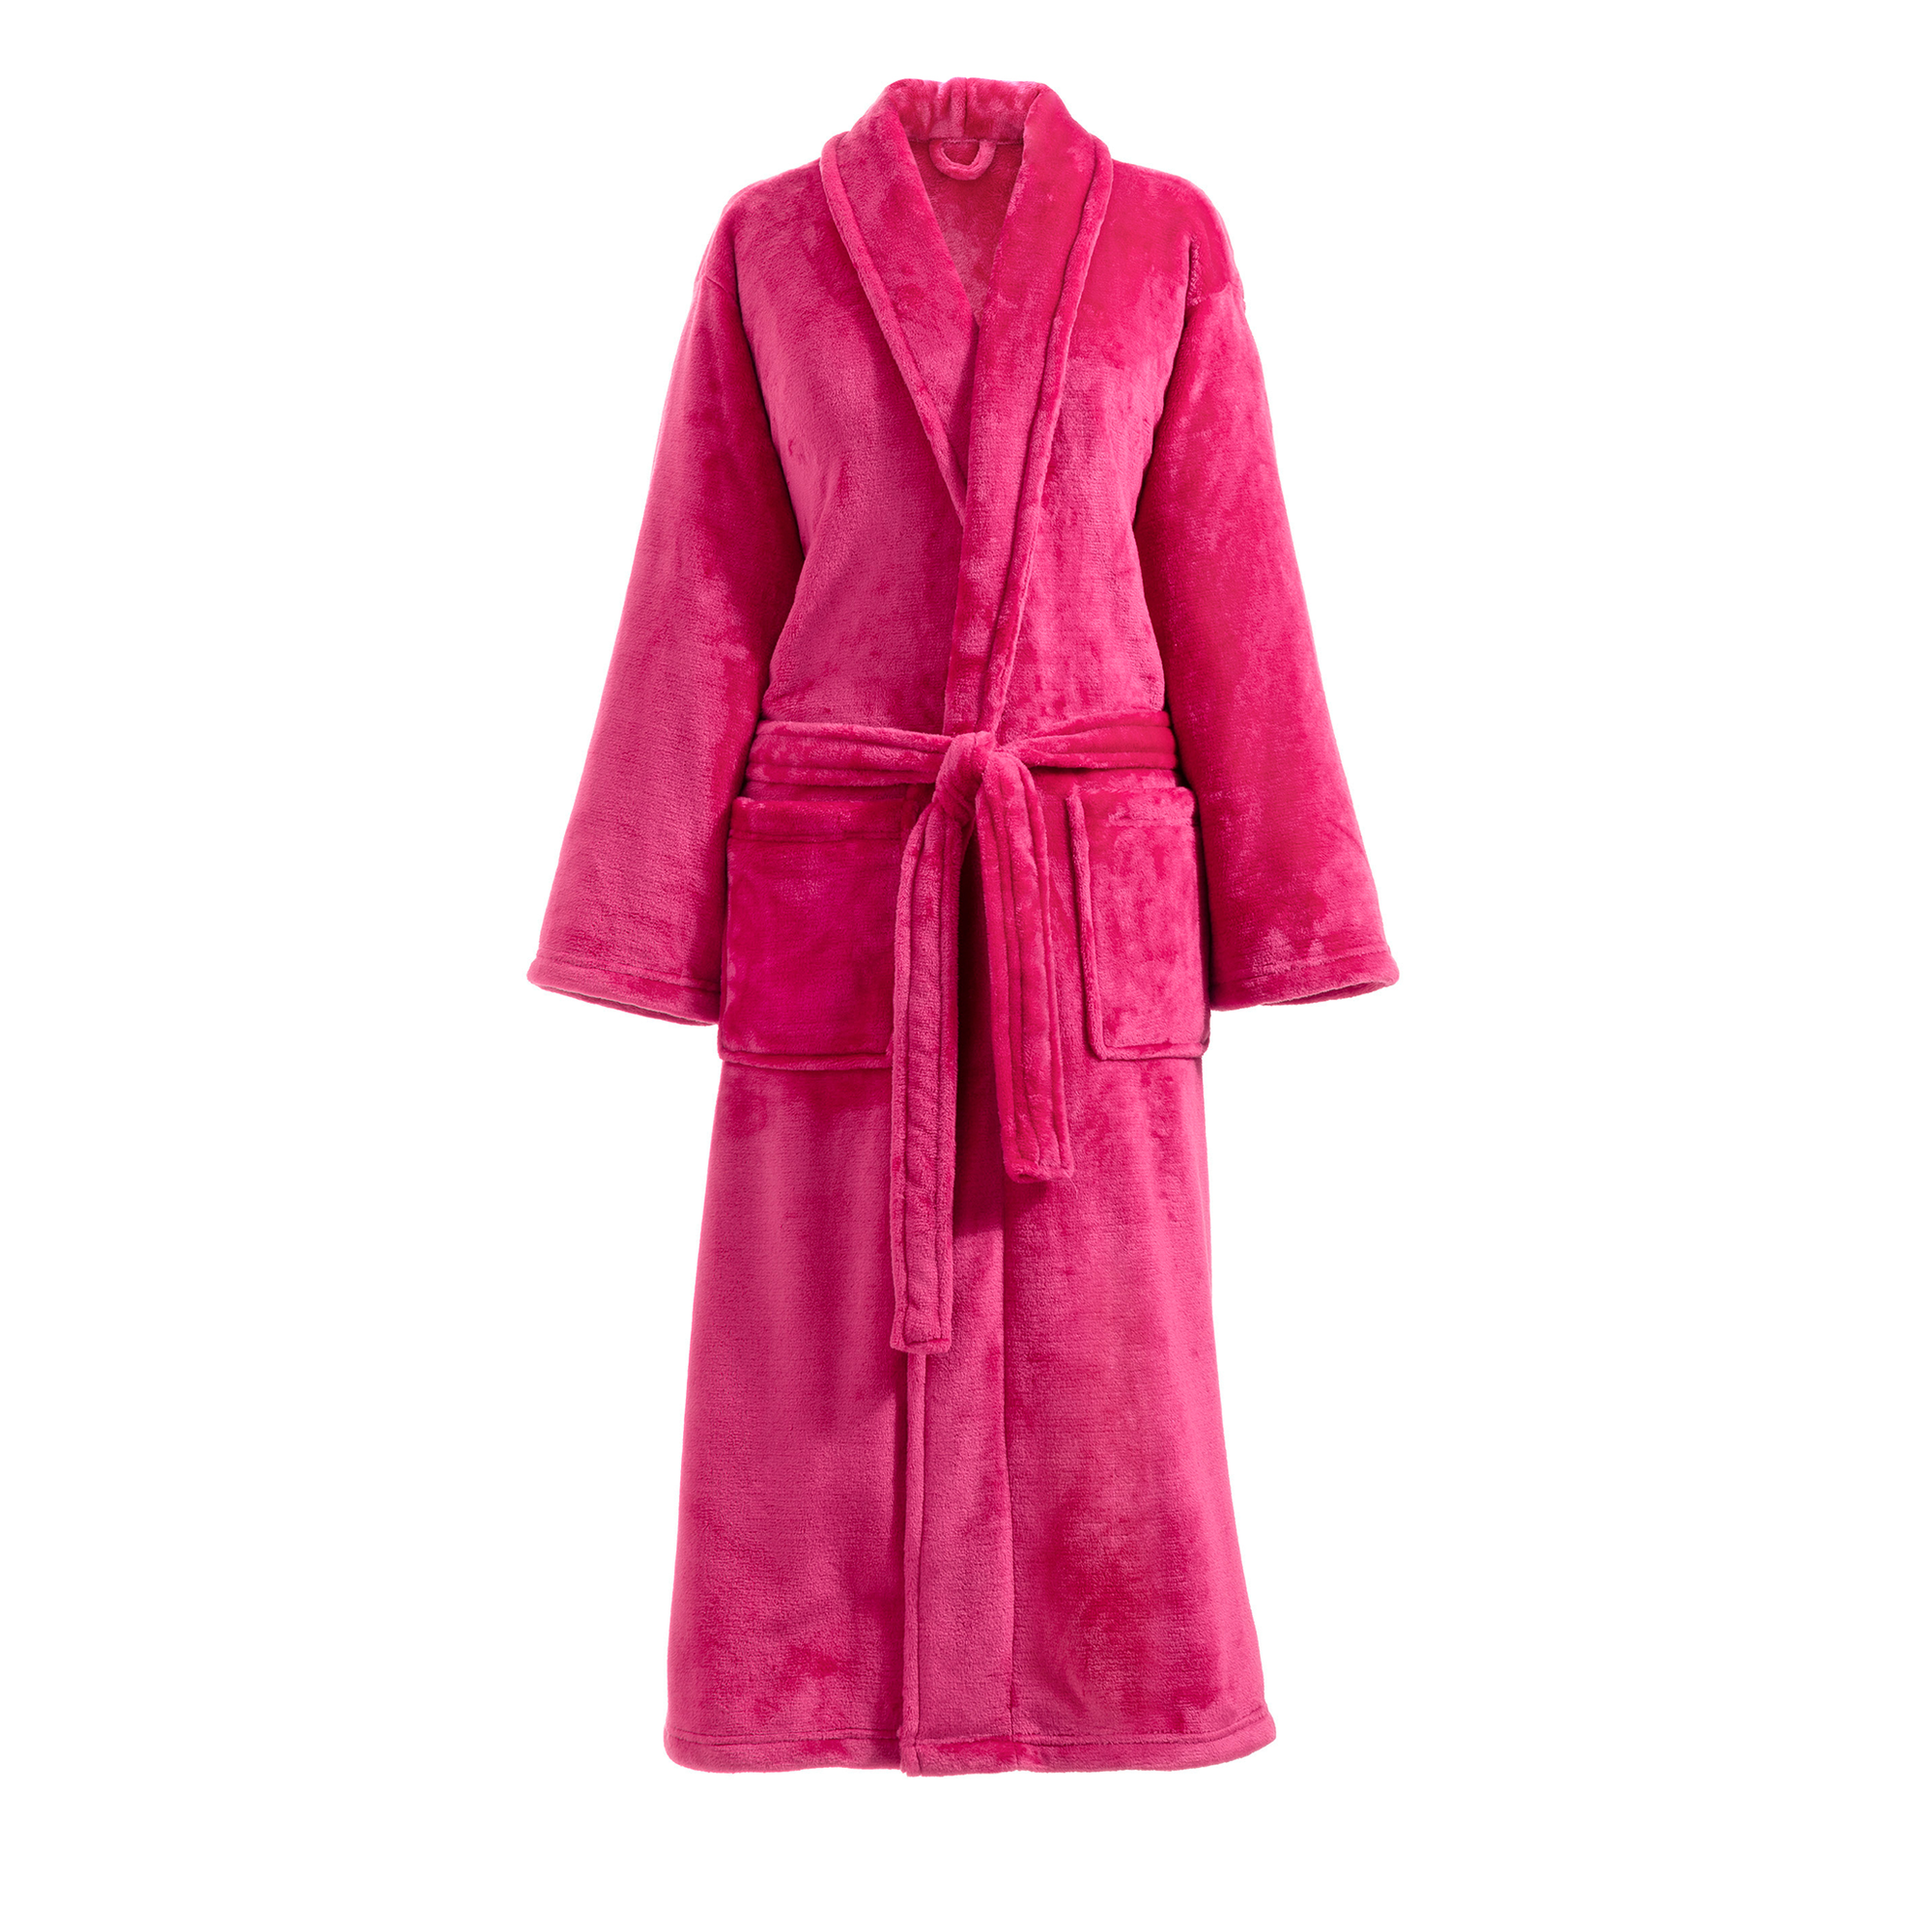 Whole Image of Pine Cone Hill Sheepy Fleece 2.0 Robe in Cerise Color